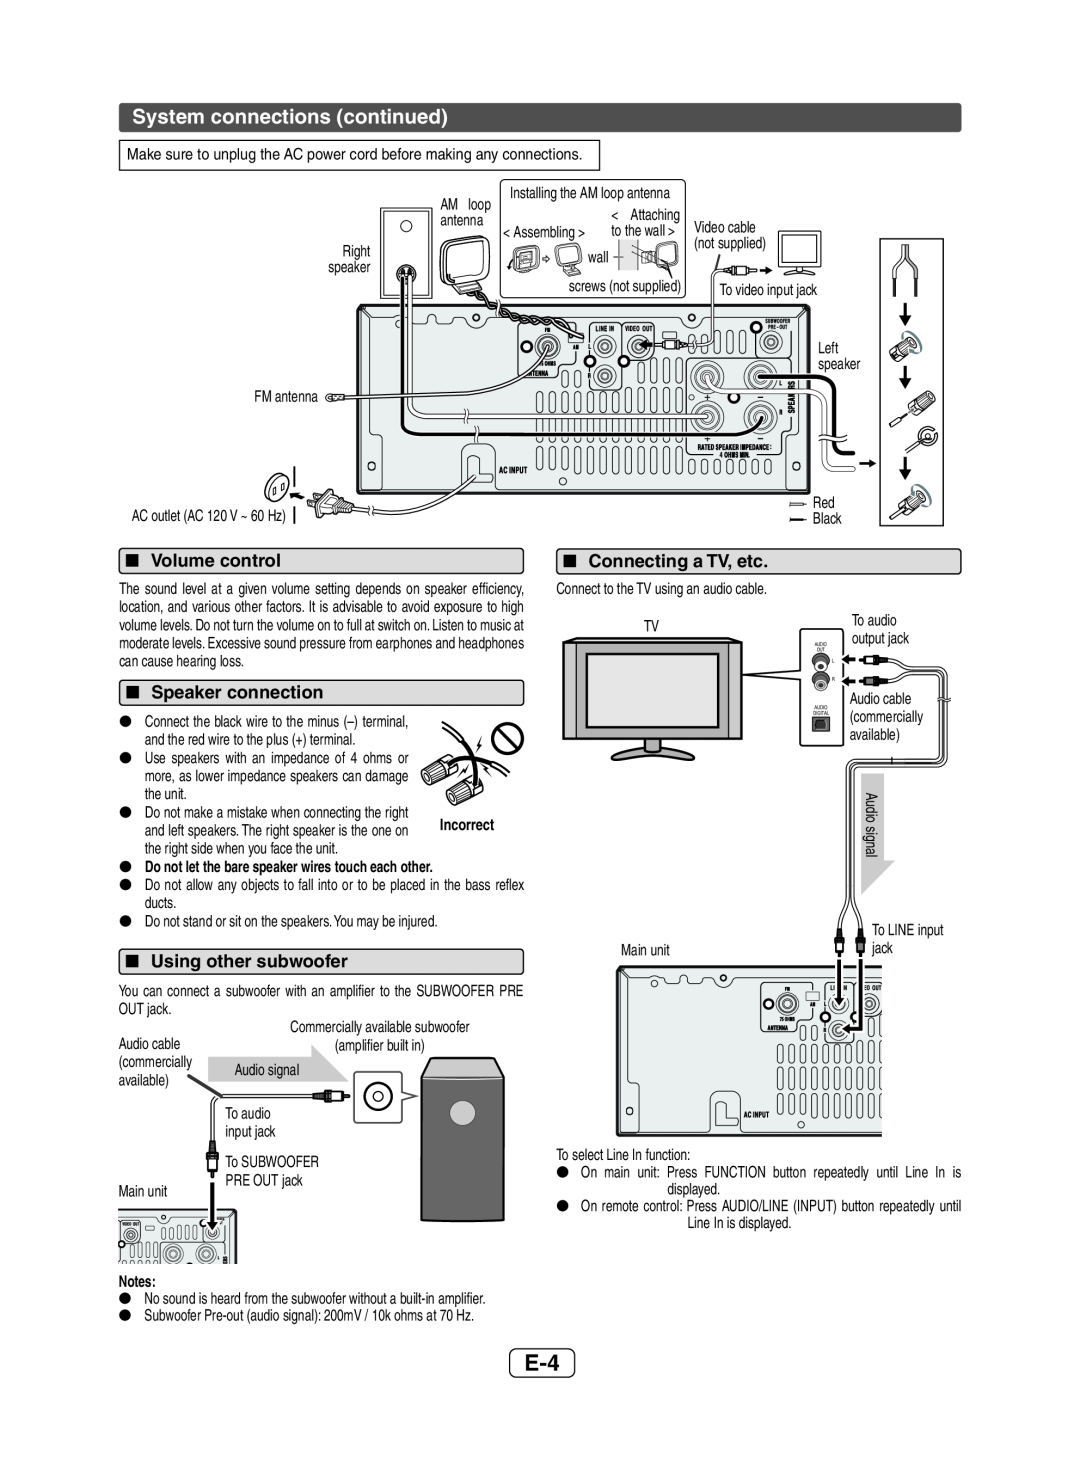 Sony XL-HF200P(BK) operation manual System connections continued, Volume control, Speaker connection, Using other subwoofer 